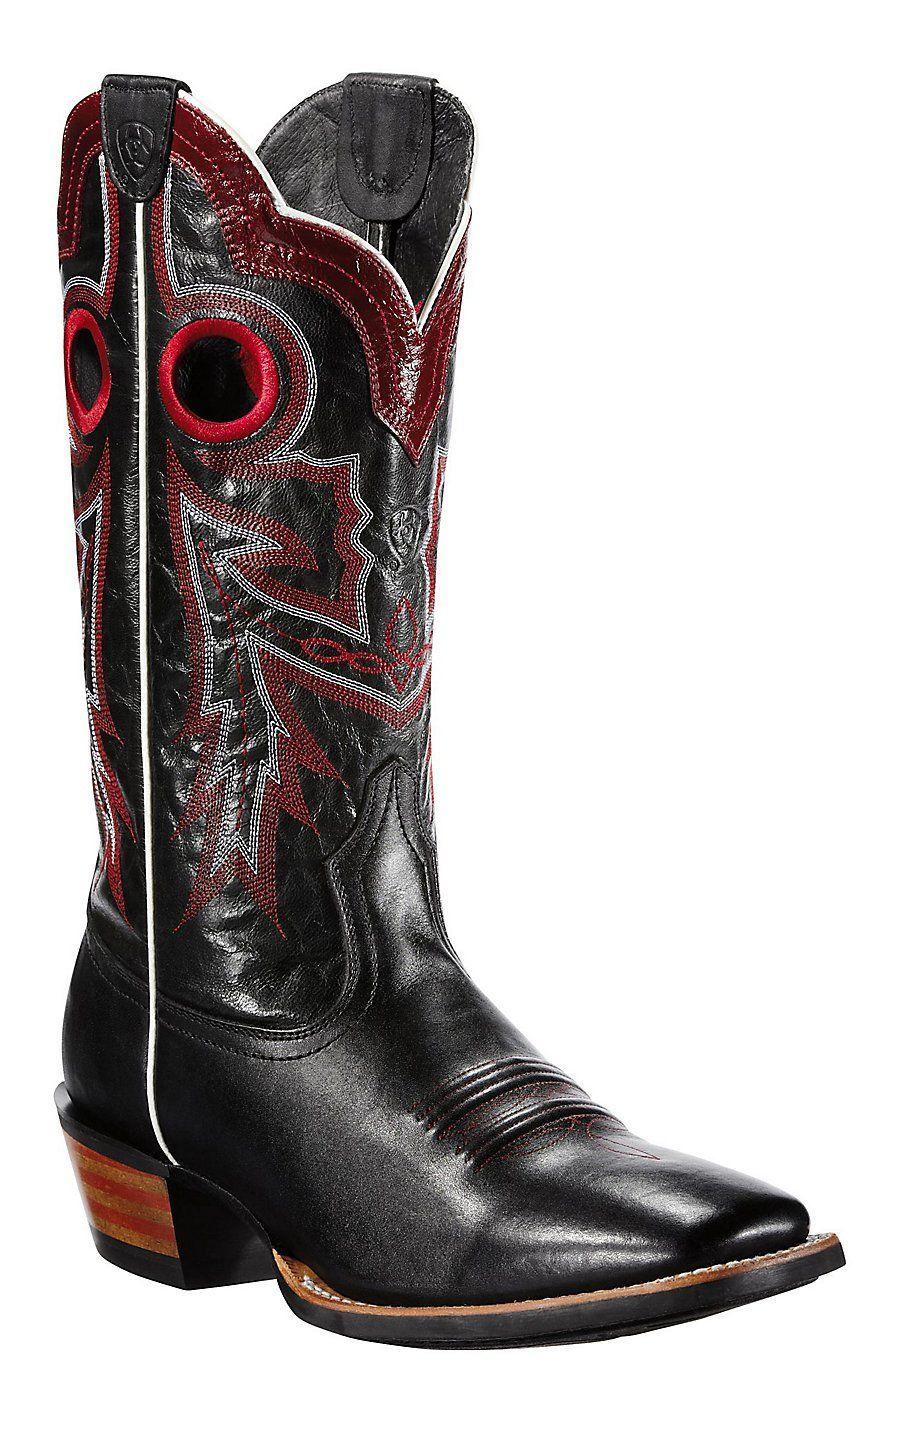 Red and Black Cowboy Logo - Ariat Wildstock Men's Black with Red Stitch Double Welt Square Toe ...